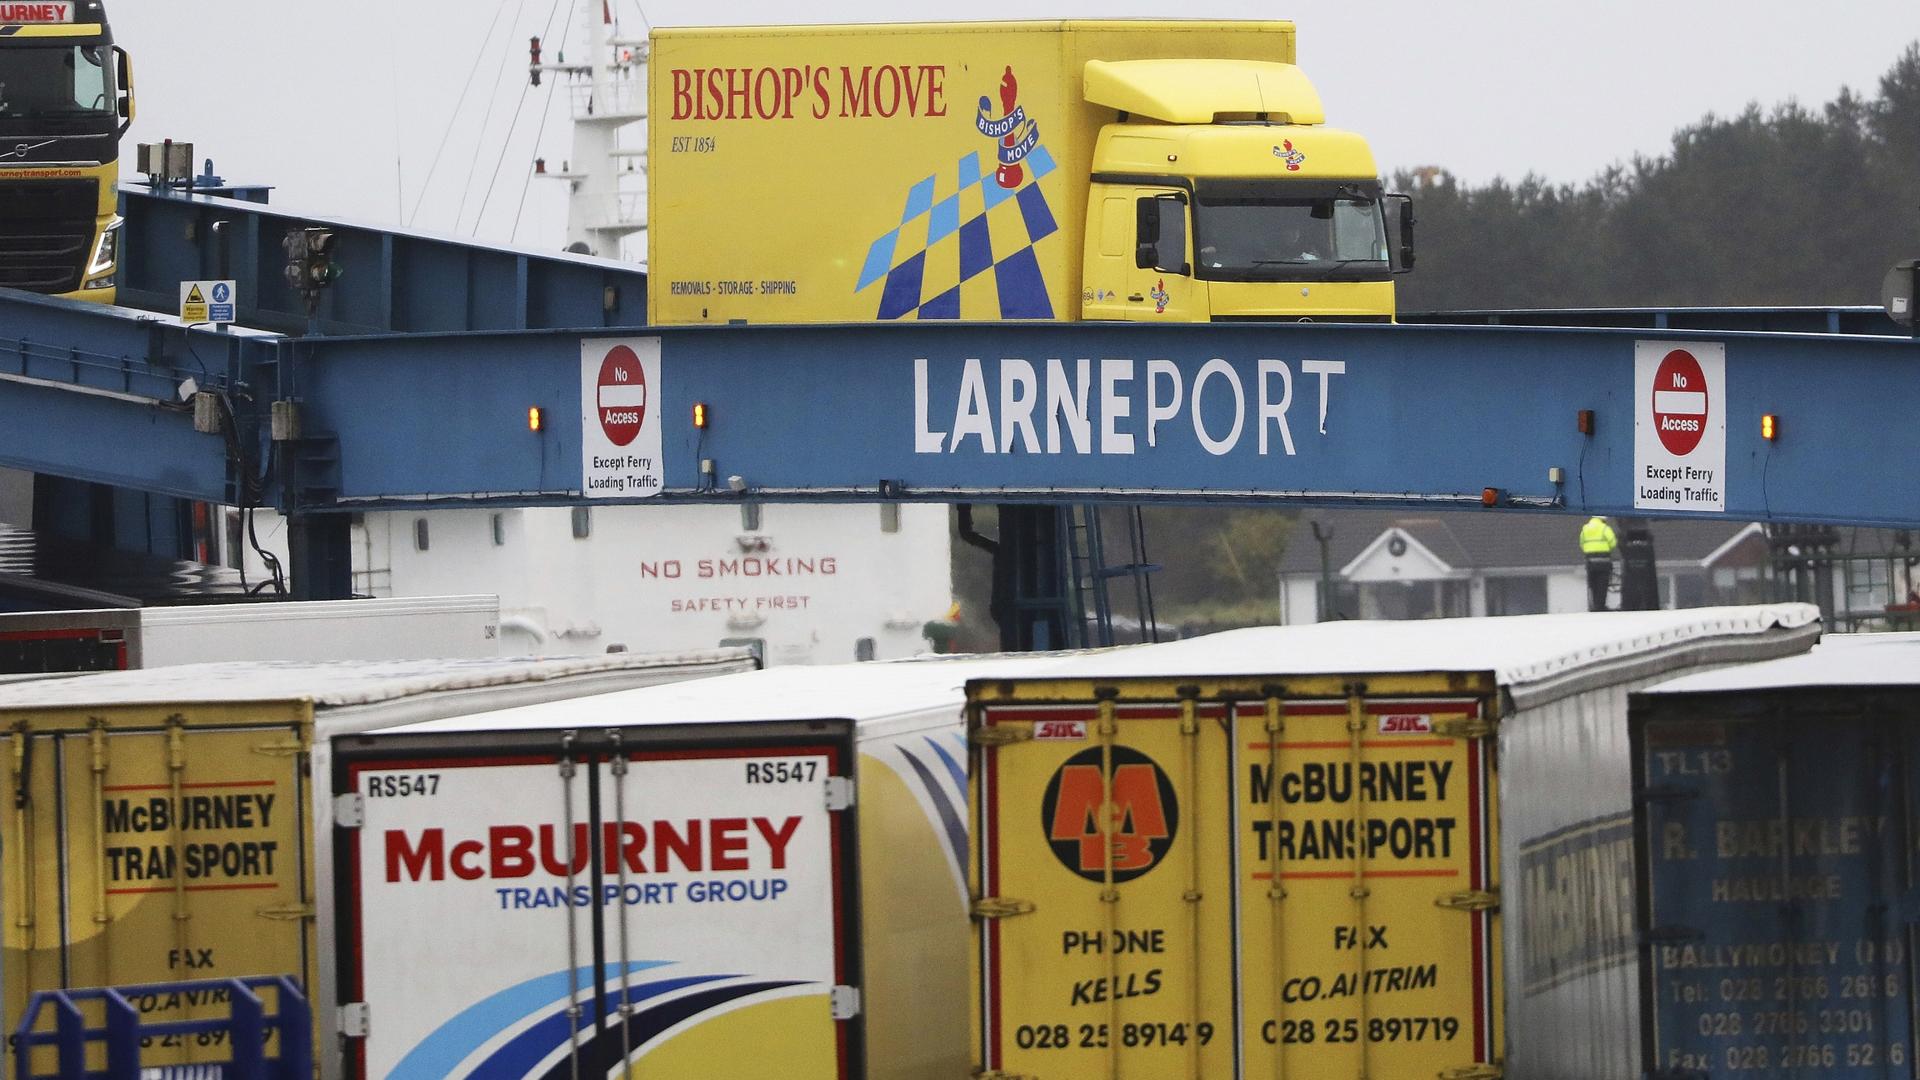 Blue, yellow, and white vehicles disembark from a ferry arriving from Scotland.  